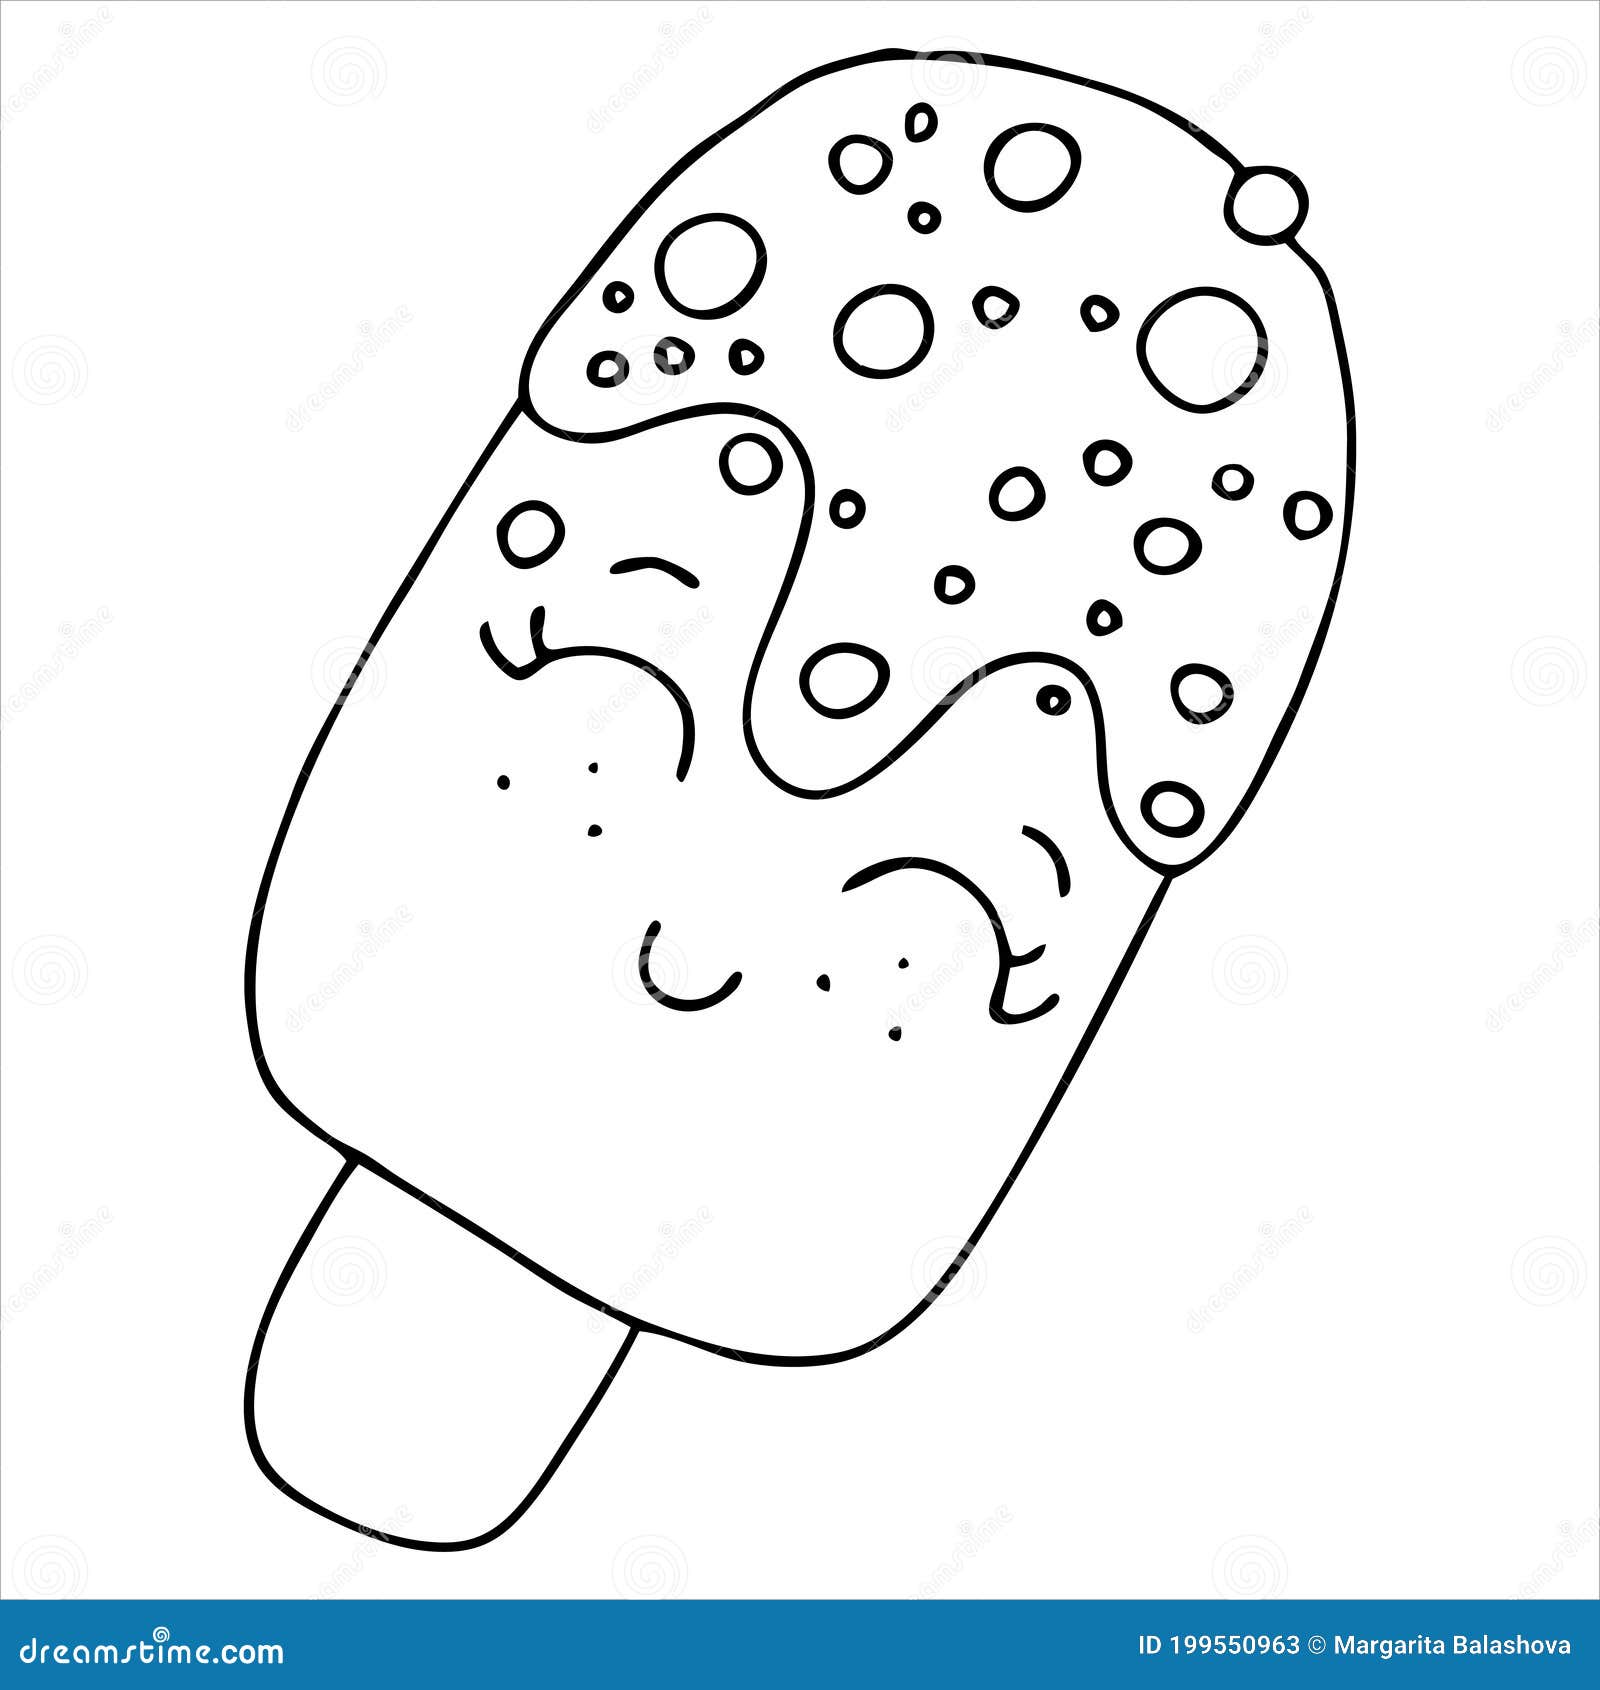 Popsicle Coloring Stock Illustrations – 20 Popsicle Coloring ...